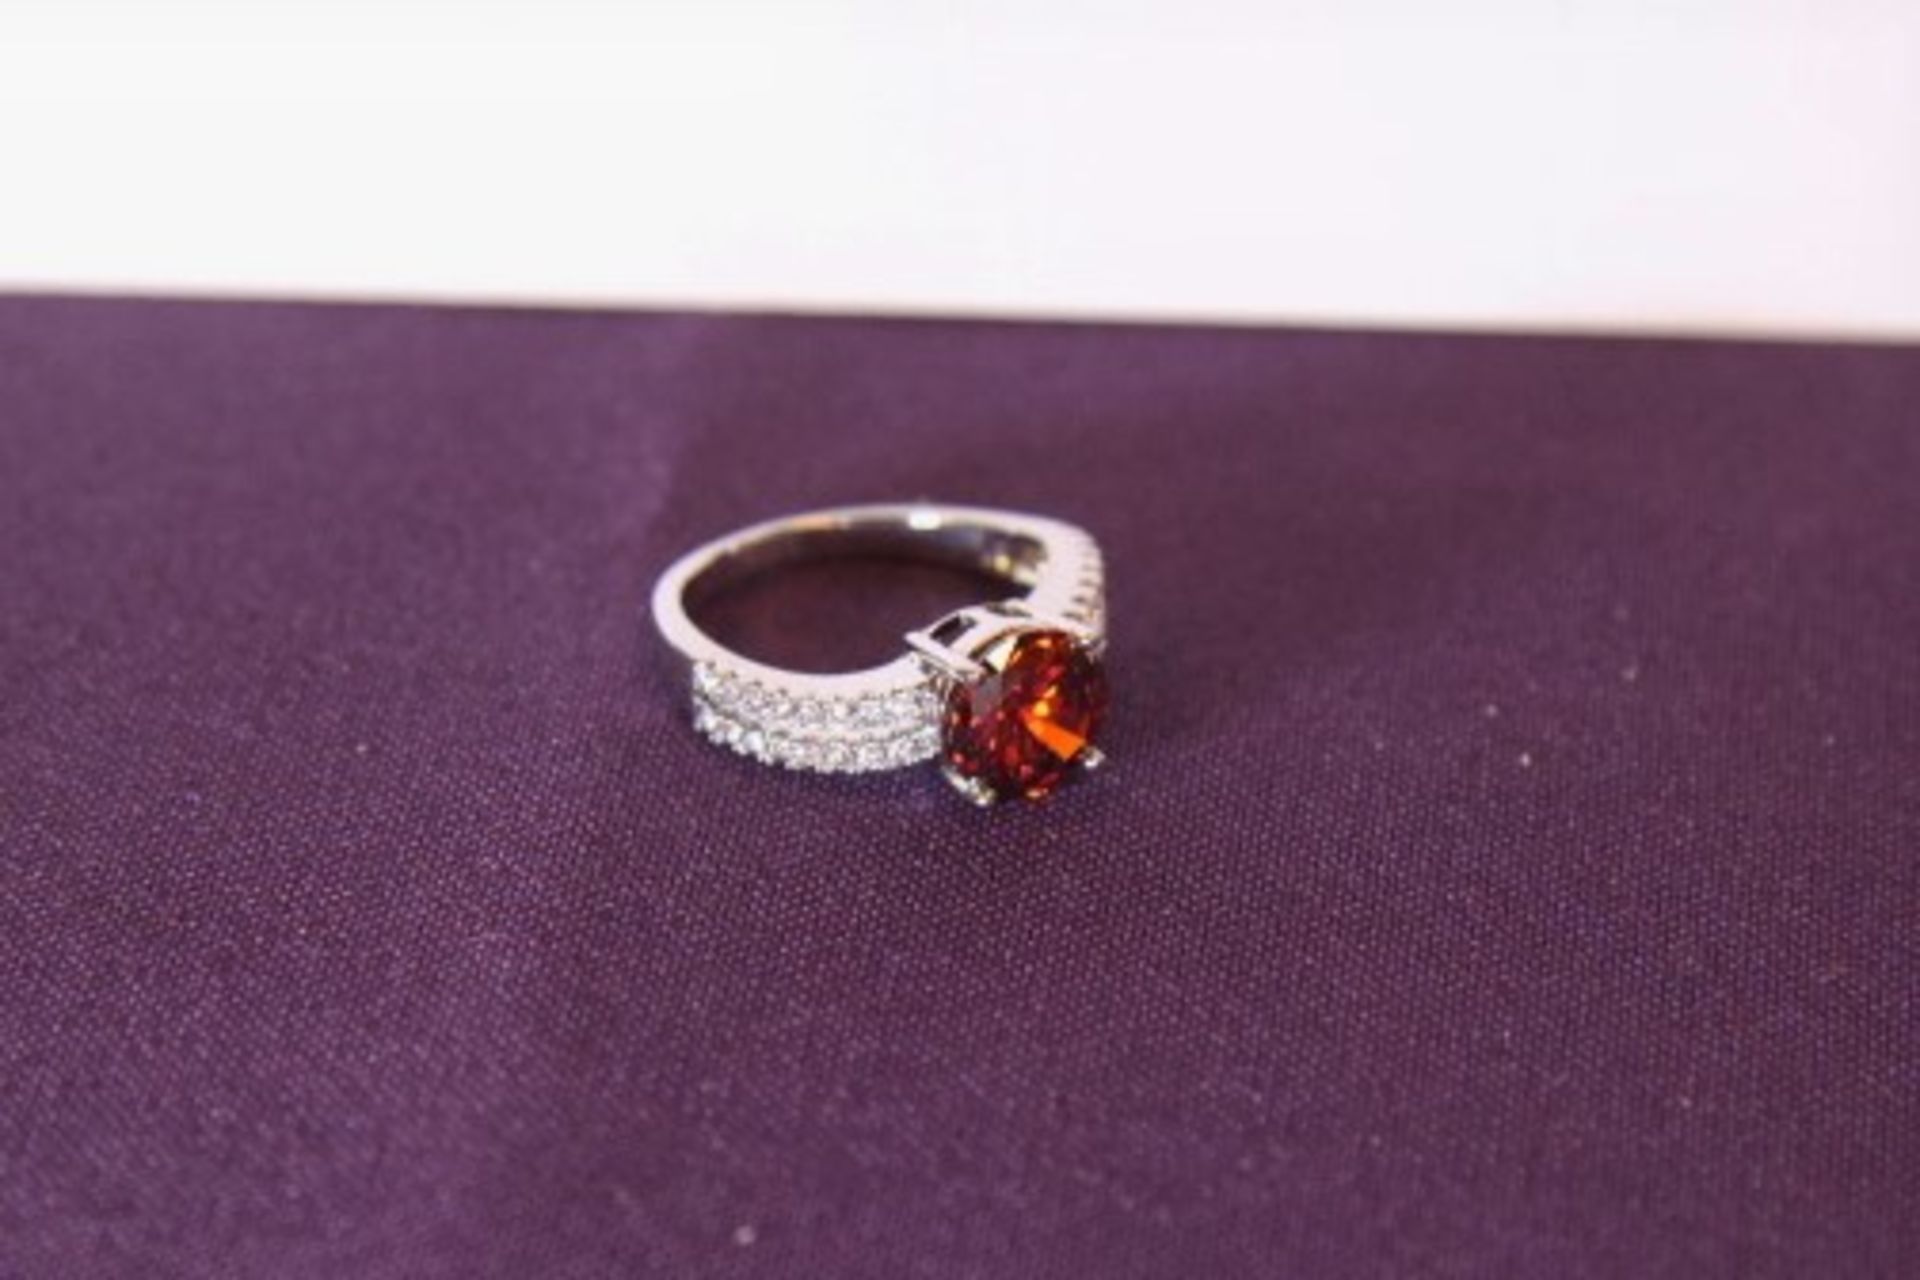 V *TRADE QTY* Brand New Platinum Plated Red and White Stone Ring X 3 YOUR BID PRICE TO BE MULTIPLIED